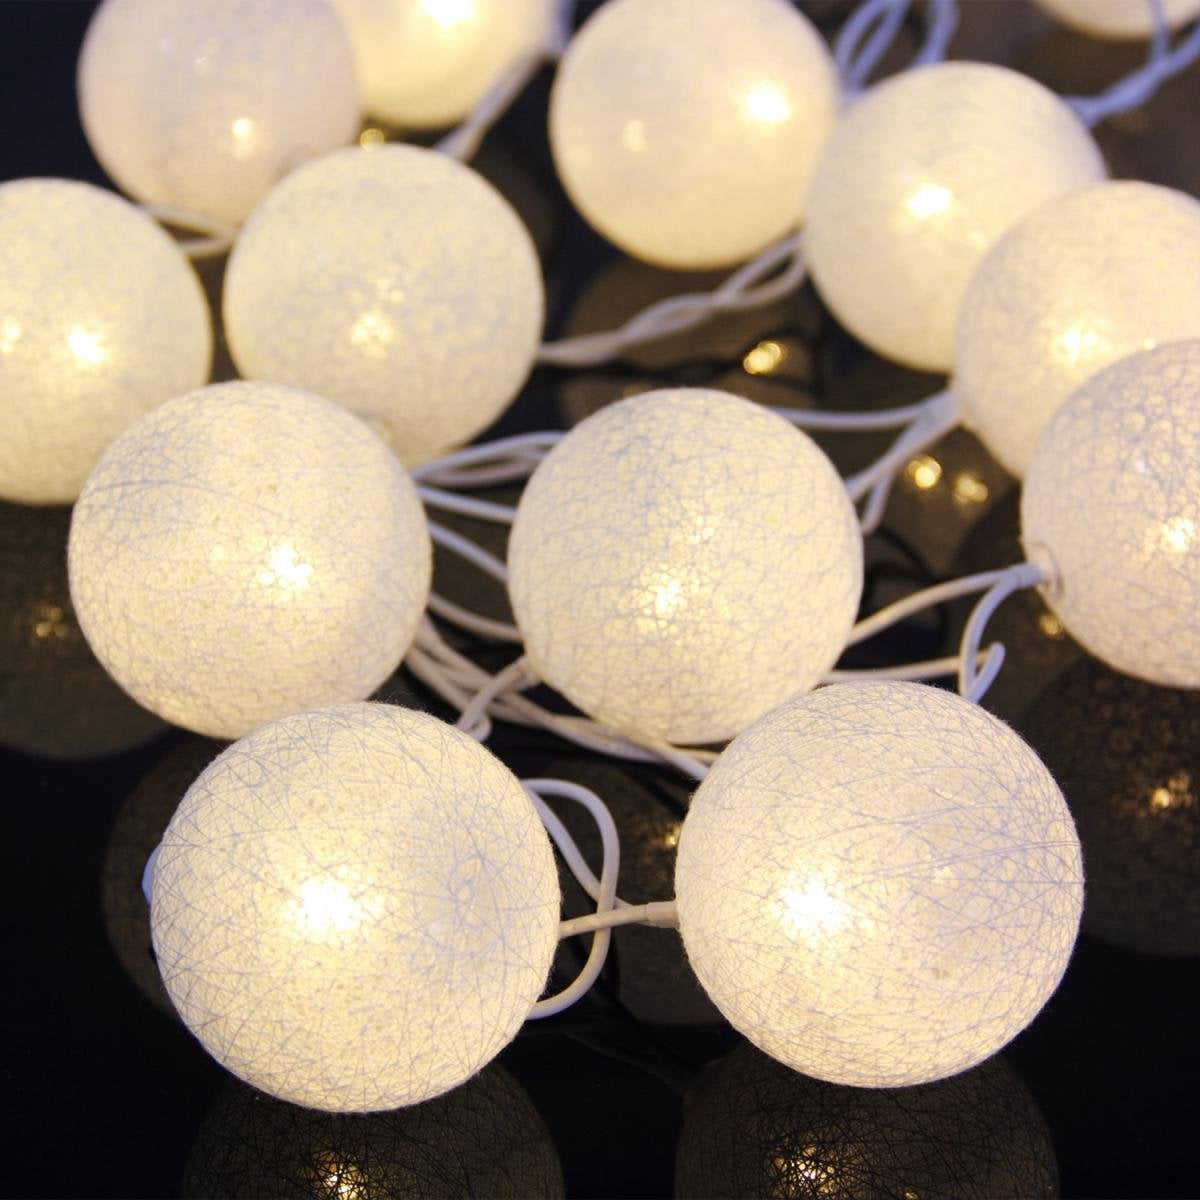 20 LED Colorful Fairy Cotton Ball String Lights Xmas Wedding Party Decor Lamp-RO 